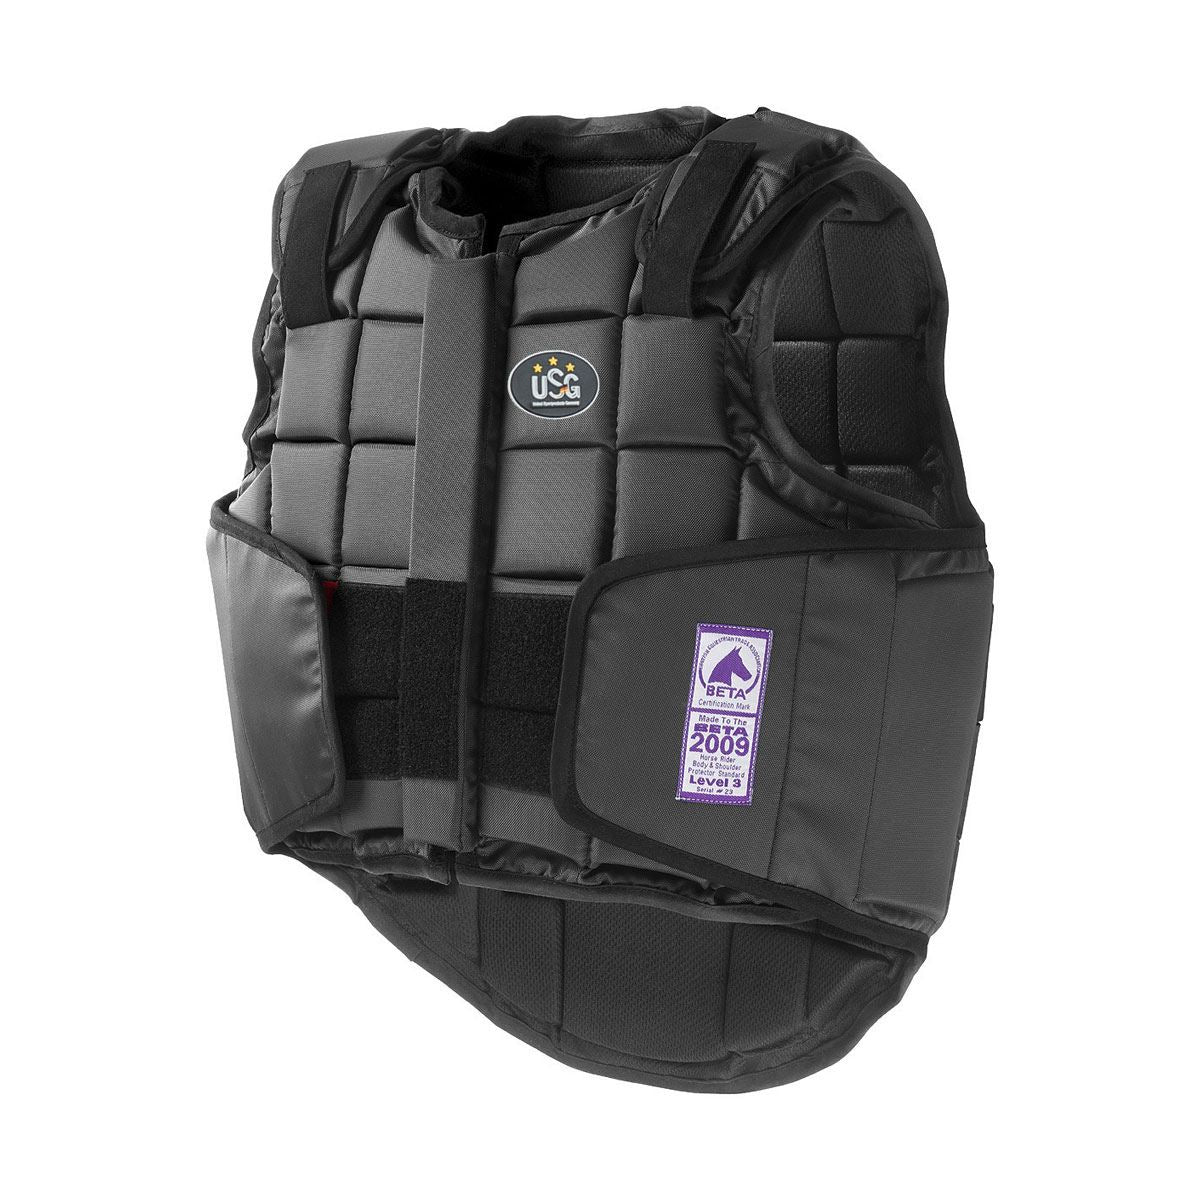 USG Flexi Panel Body Protector - Just Horse Riders